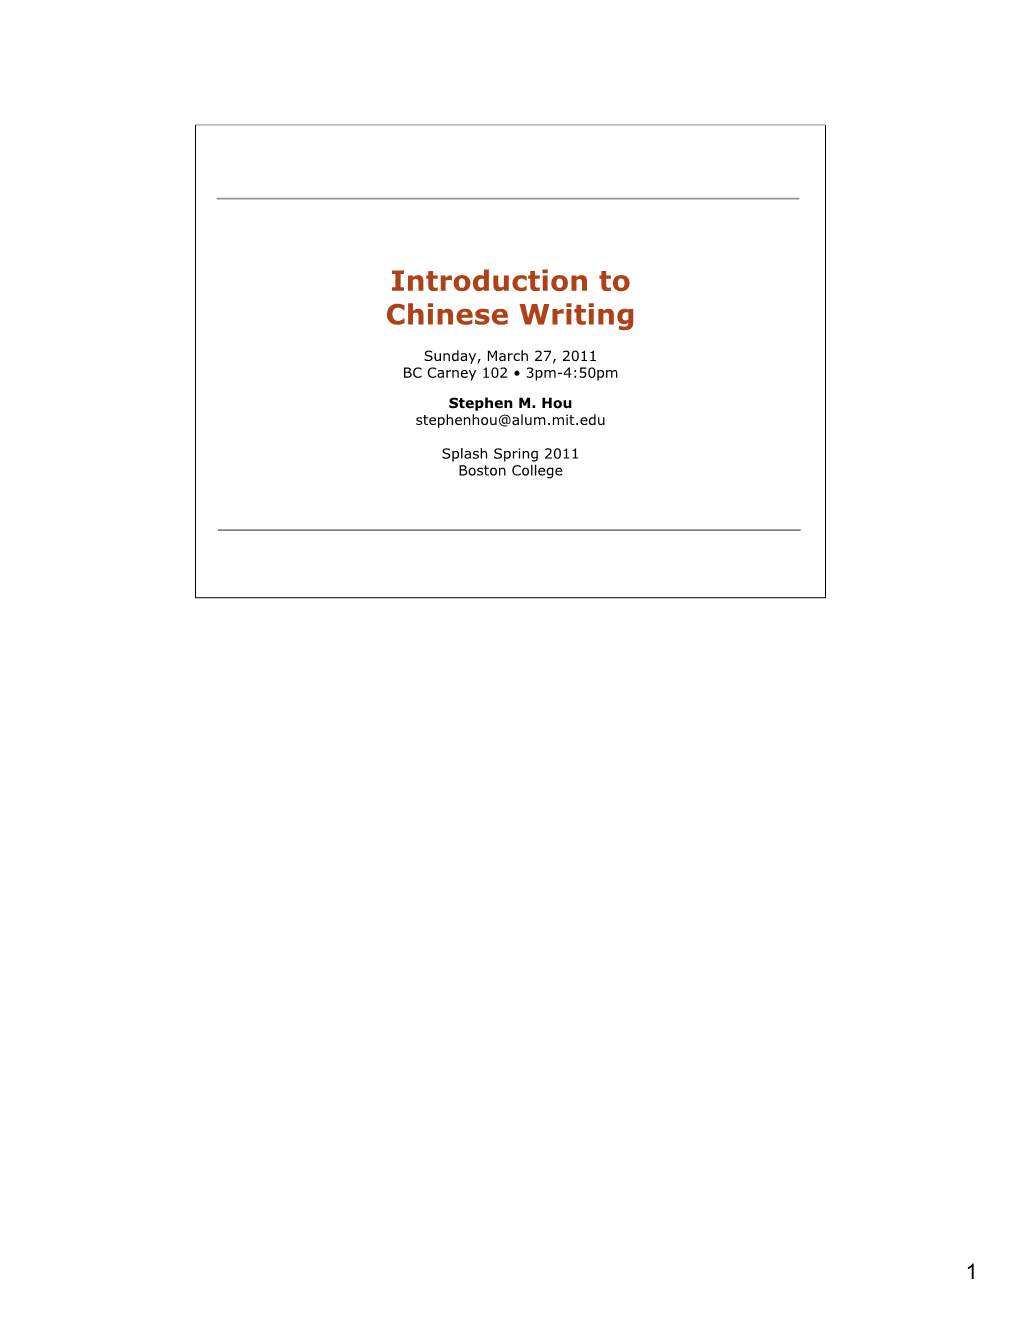 Introduction to Chinese Writing